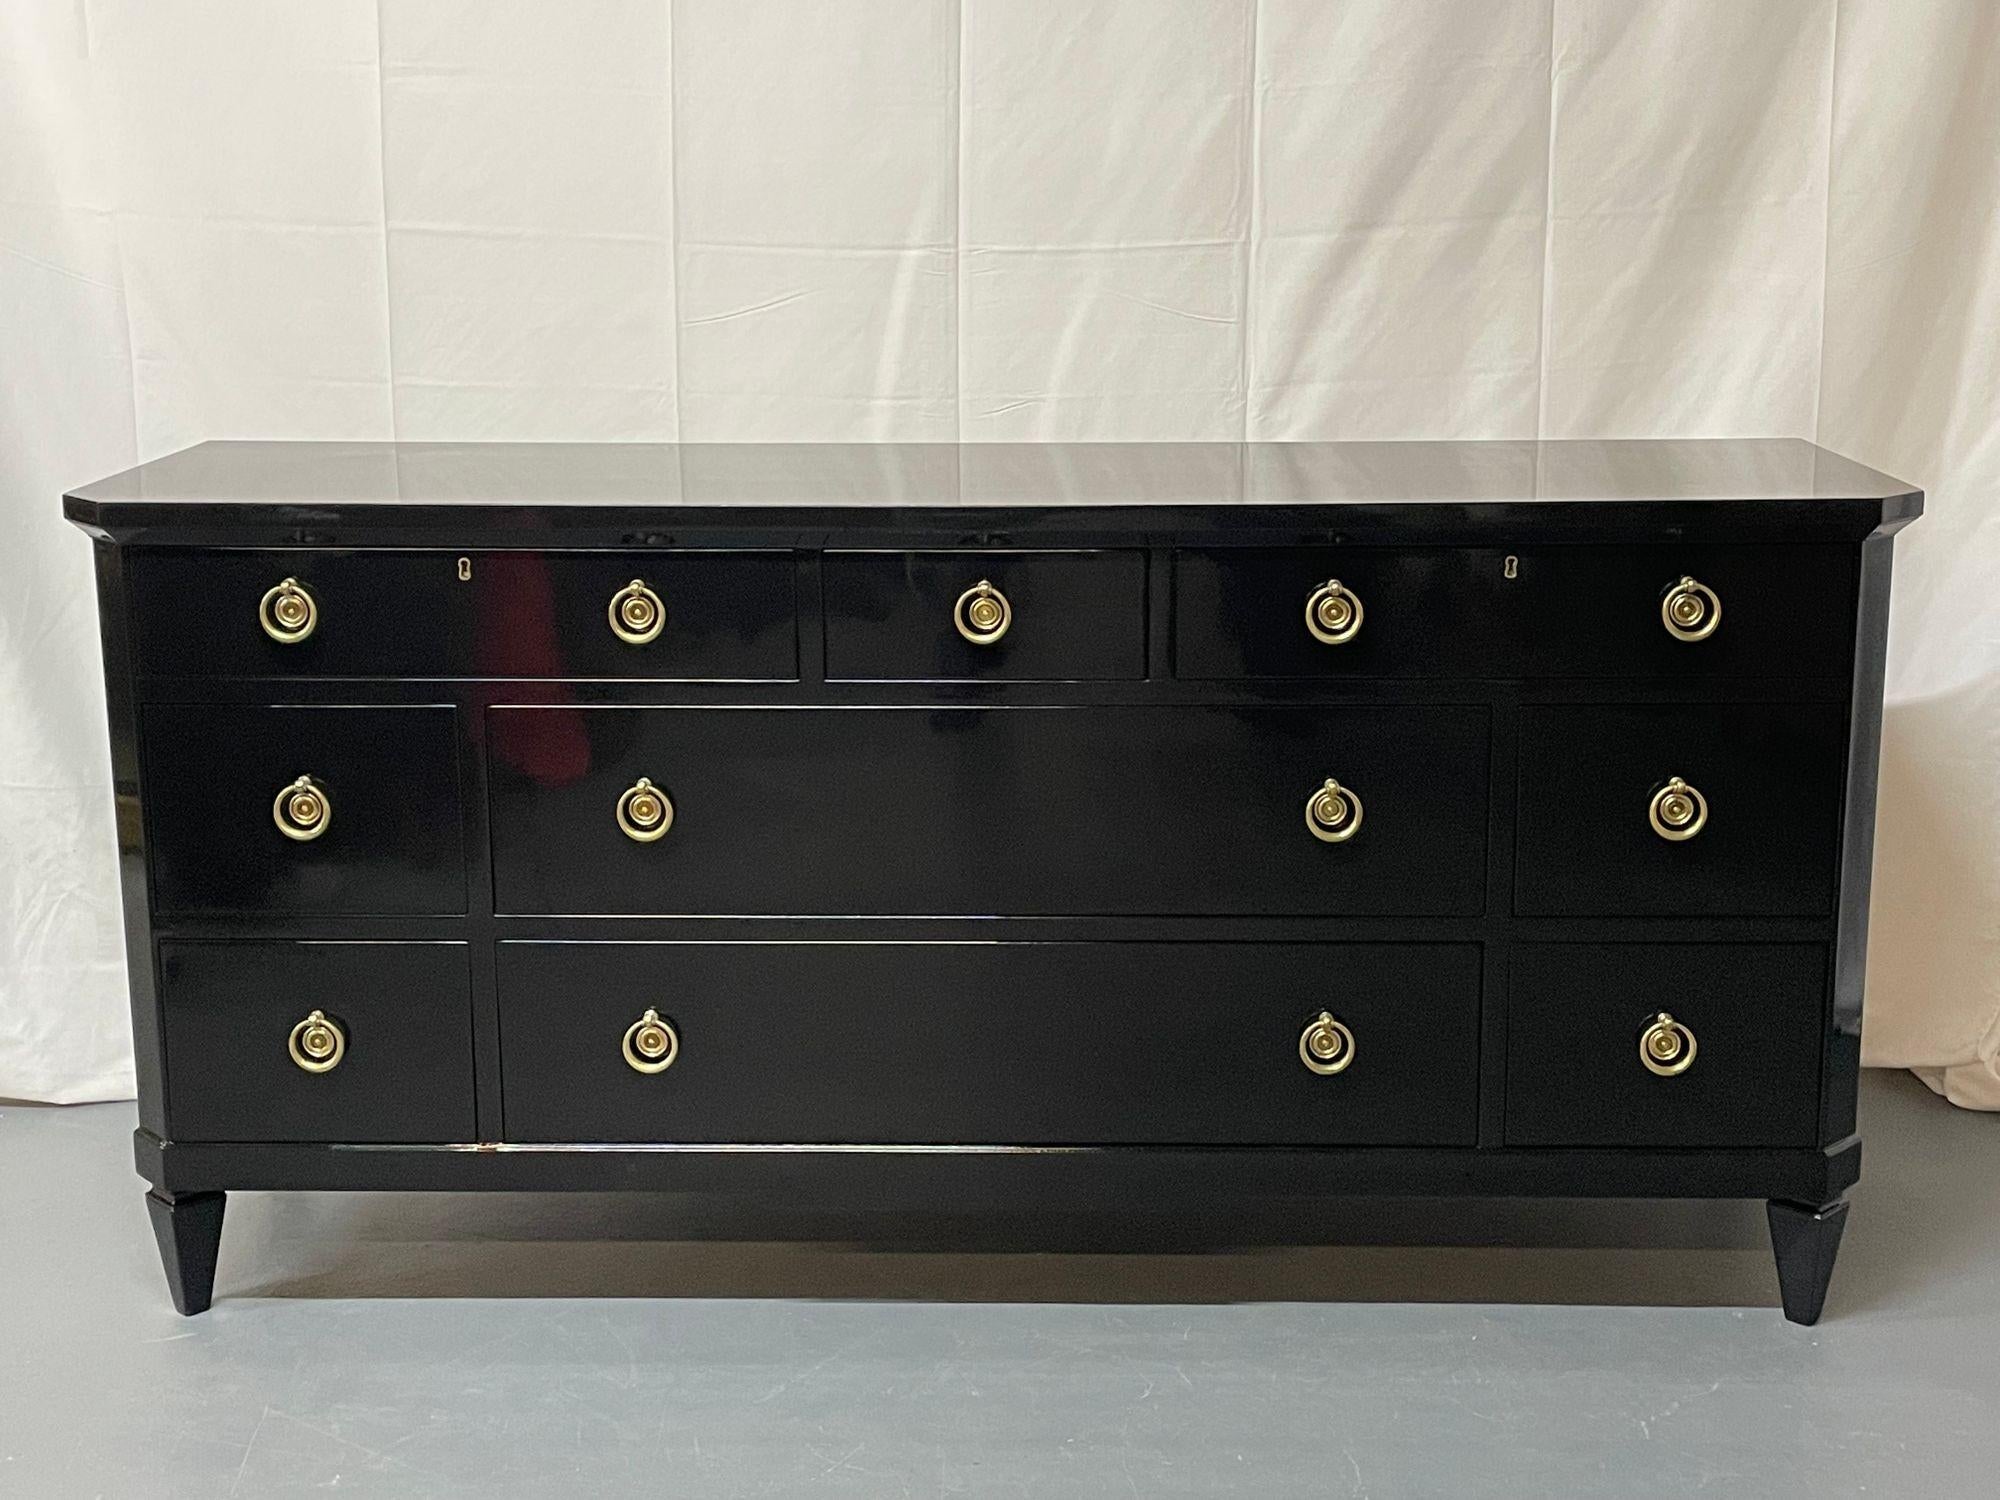 Hollywood Regency Black Lacquered Dresser, Chest, Sideboard, Refinished
 
Black Lacquered Nine Drawer Kittinger Antique Dresser, Sideboard. A simply spectacular dresser from Buffalo NY having a small center drawer flanked by two larger drawers, over